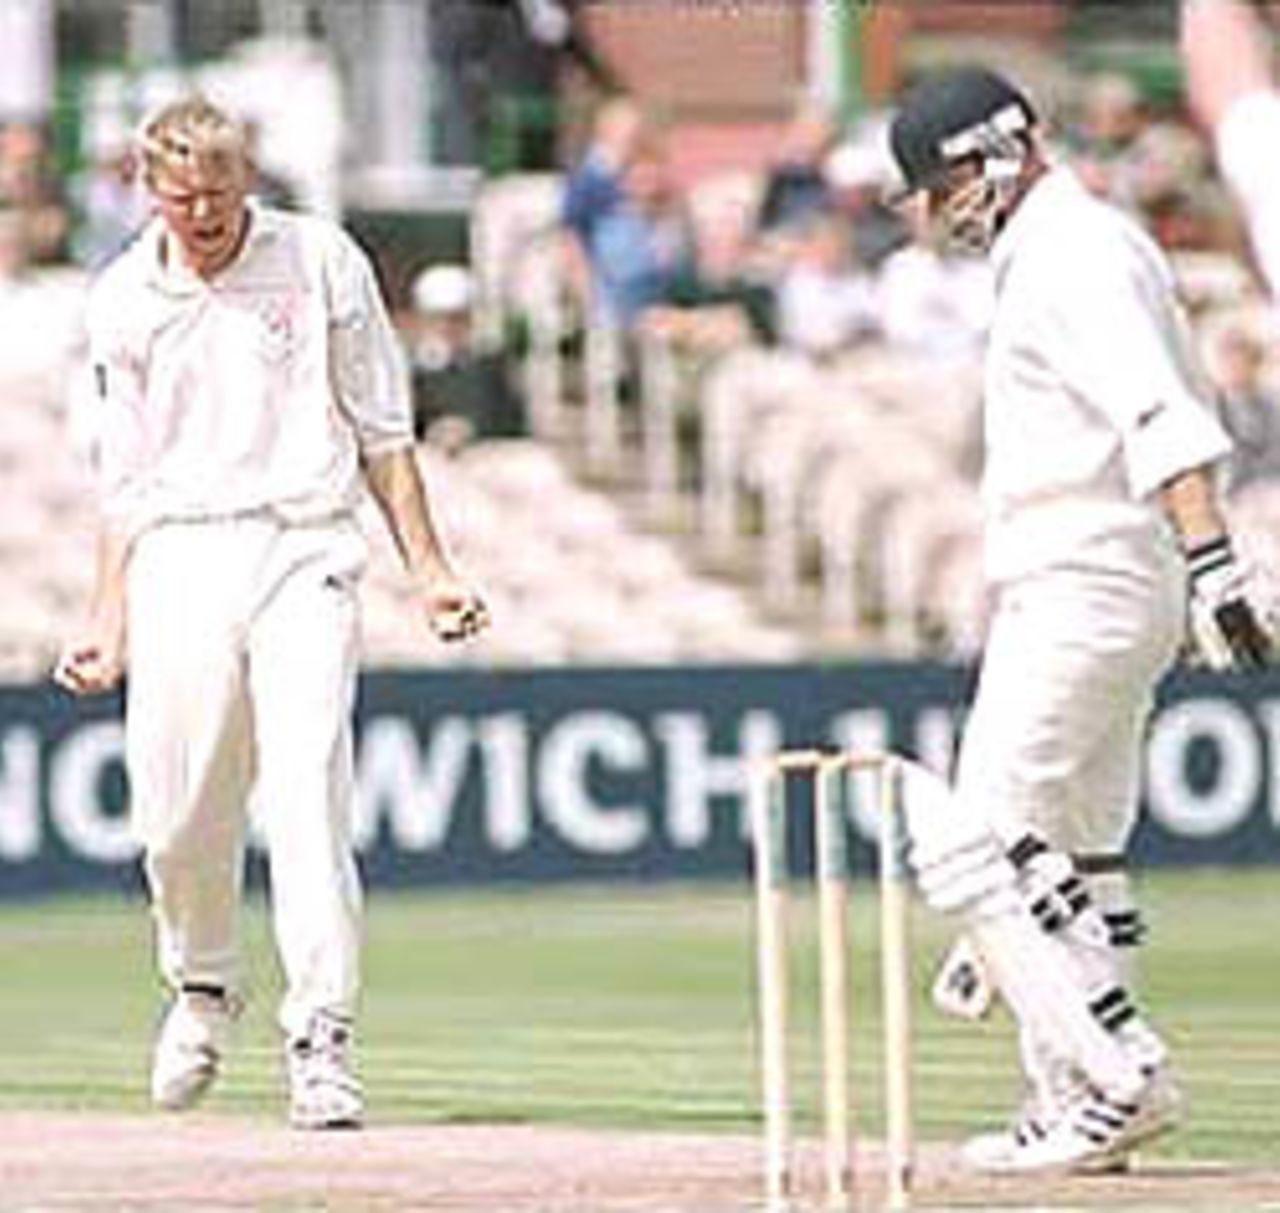 Martin all pumped up after traping Dowman leg before, PPP healthcare County Championship Division One, 2000, Lancashire v Derbyshire, Old Trafford, Manchester, 31May-03June 2000.